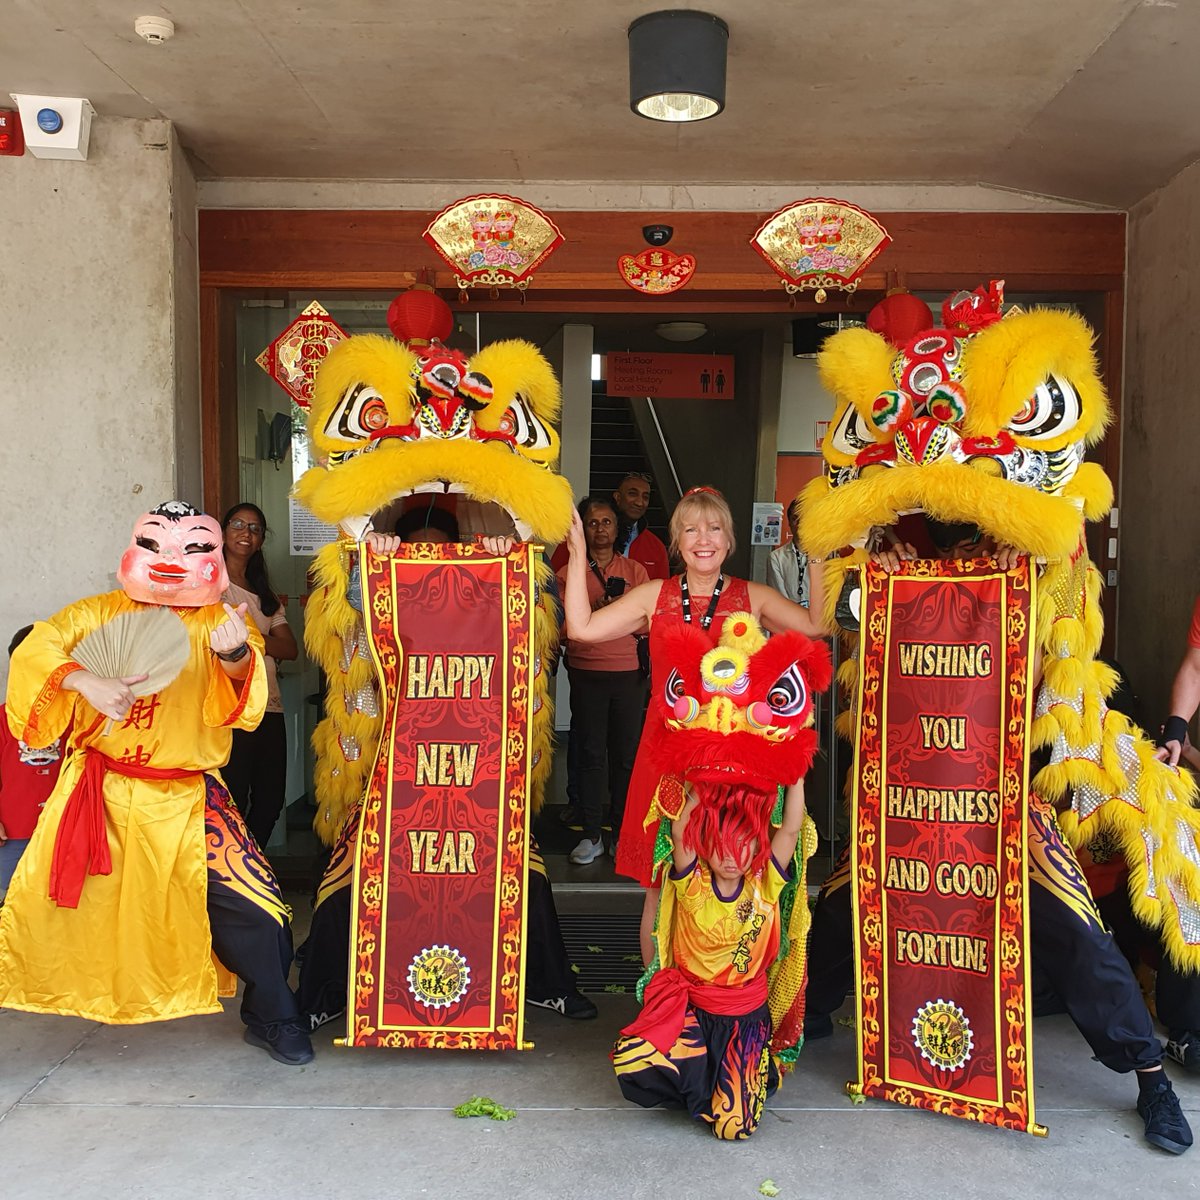 Throwback to our Lunar New Year celebrations at East Melbourne Library in February Wishing everyone a great start to The Year of the Dragon 🐉 (ID: A woman stands between 2 traditional Chinese lion dancers)